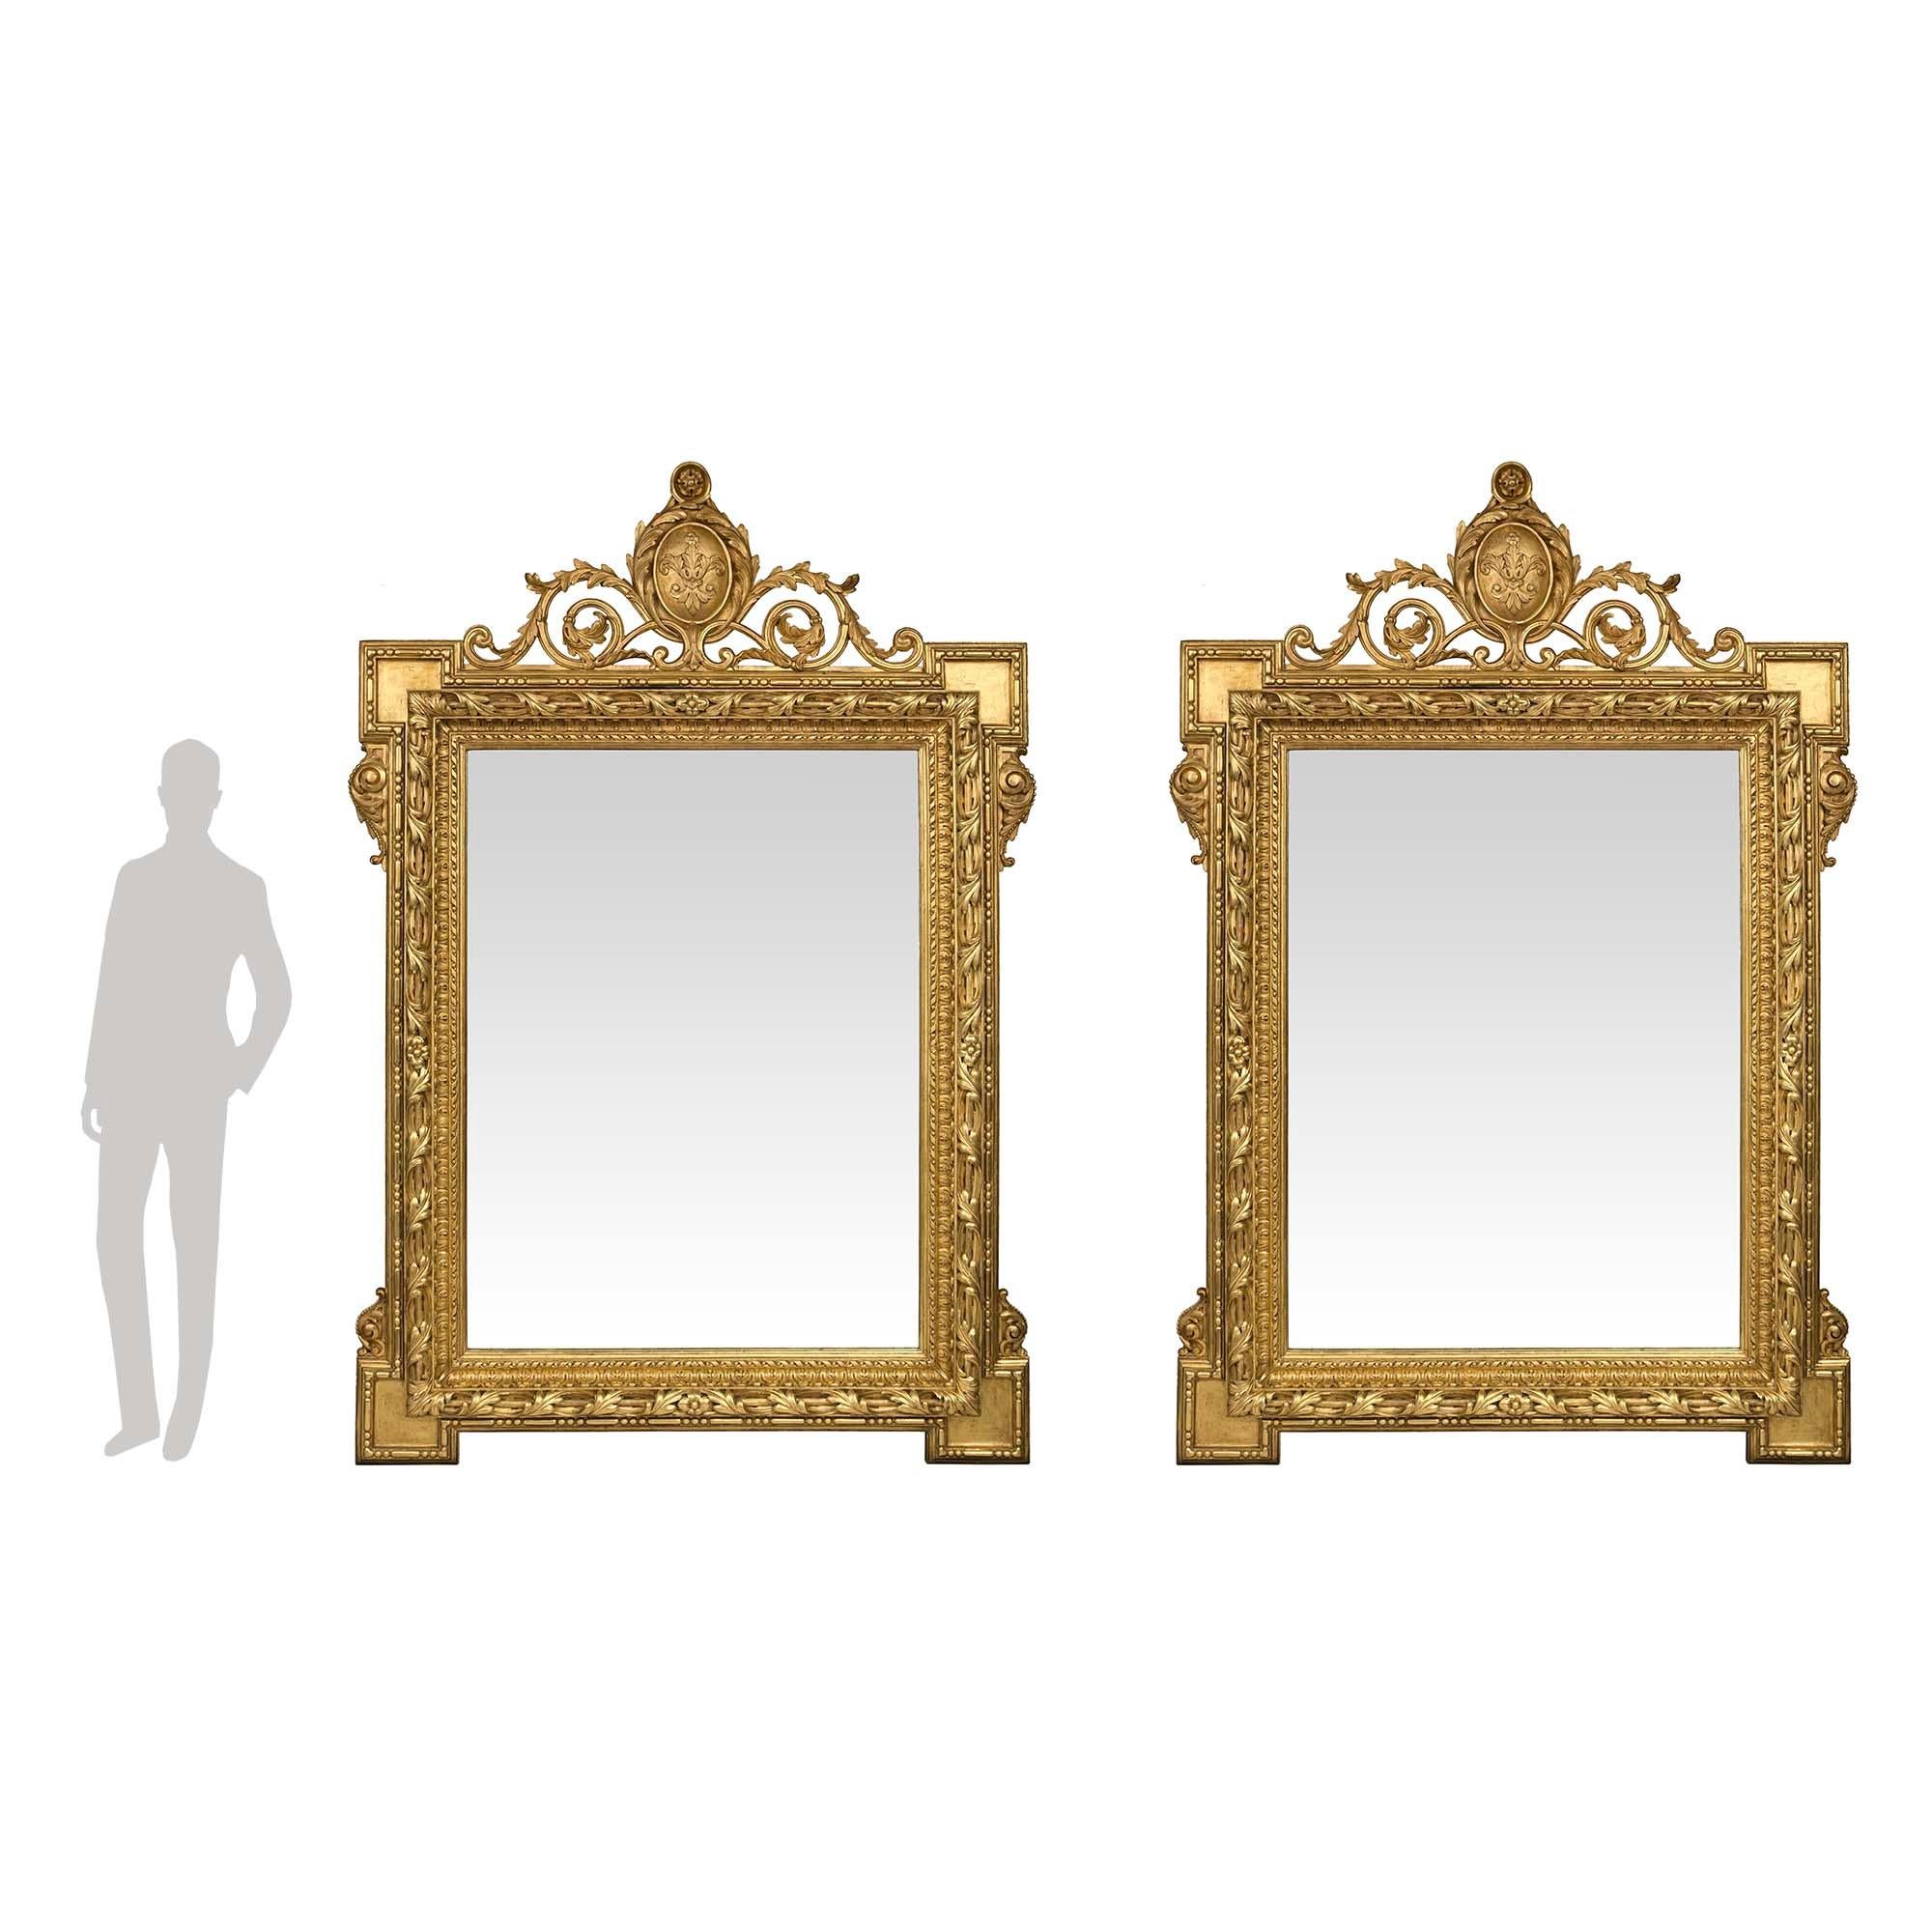 A spectacular and monumental pair of French 19th century Louis XVI st. giltwood mirrors. Each original mirror plate is framed within a striking and richly carved twisted and beaded pattern. The thick striking frame displays detailed carvings of